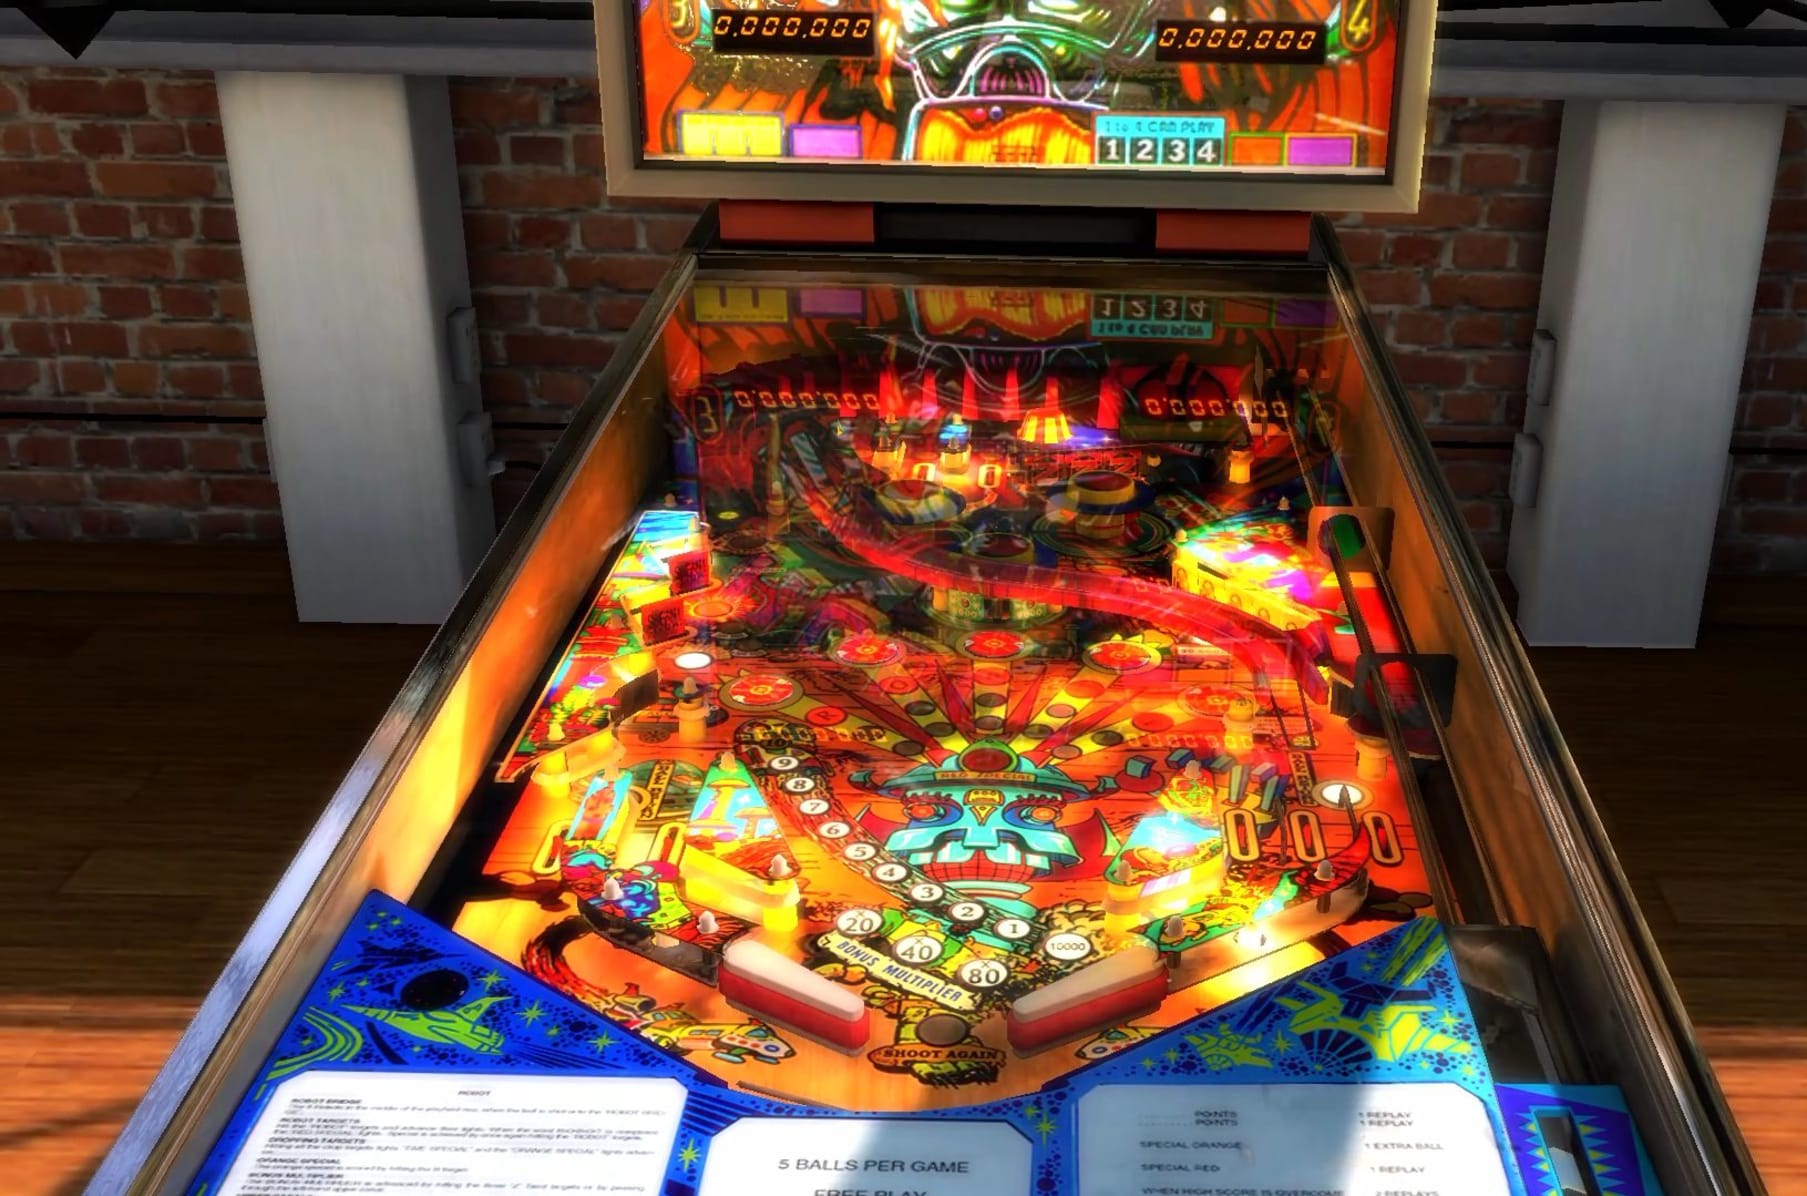 New LED display for Zaccaria pinball machines 